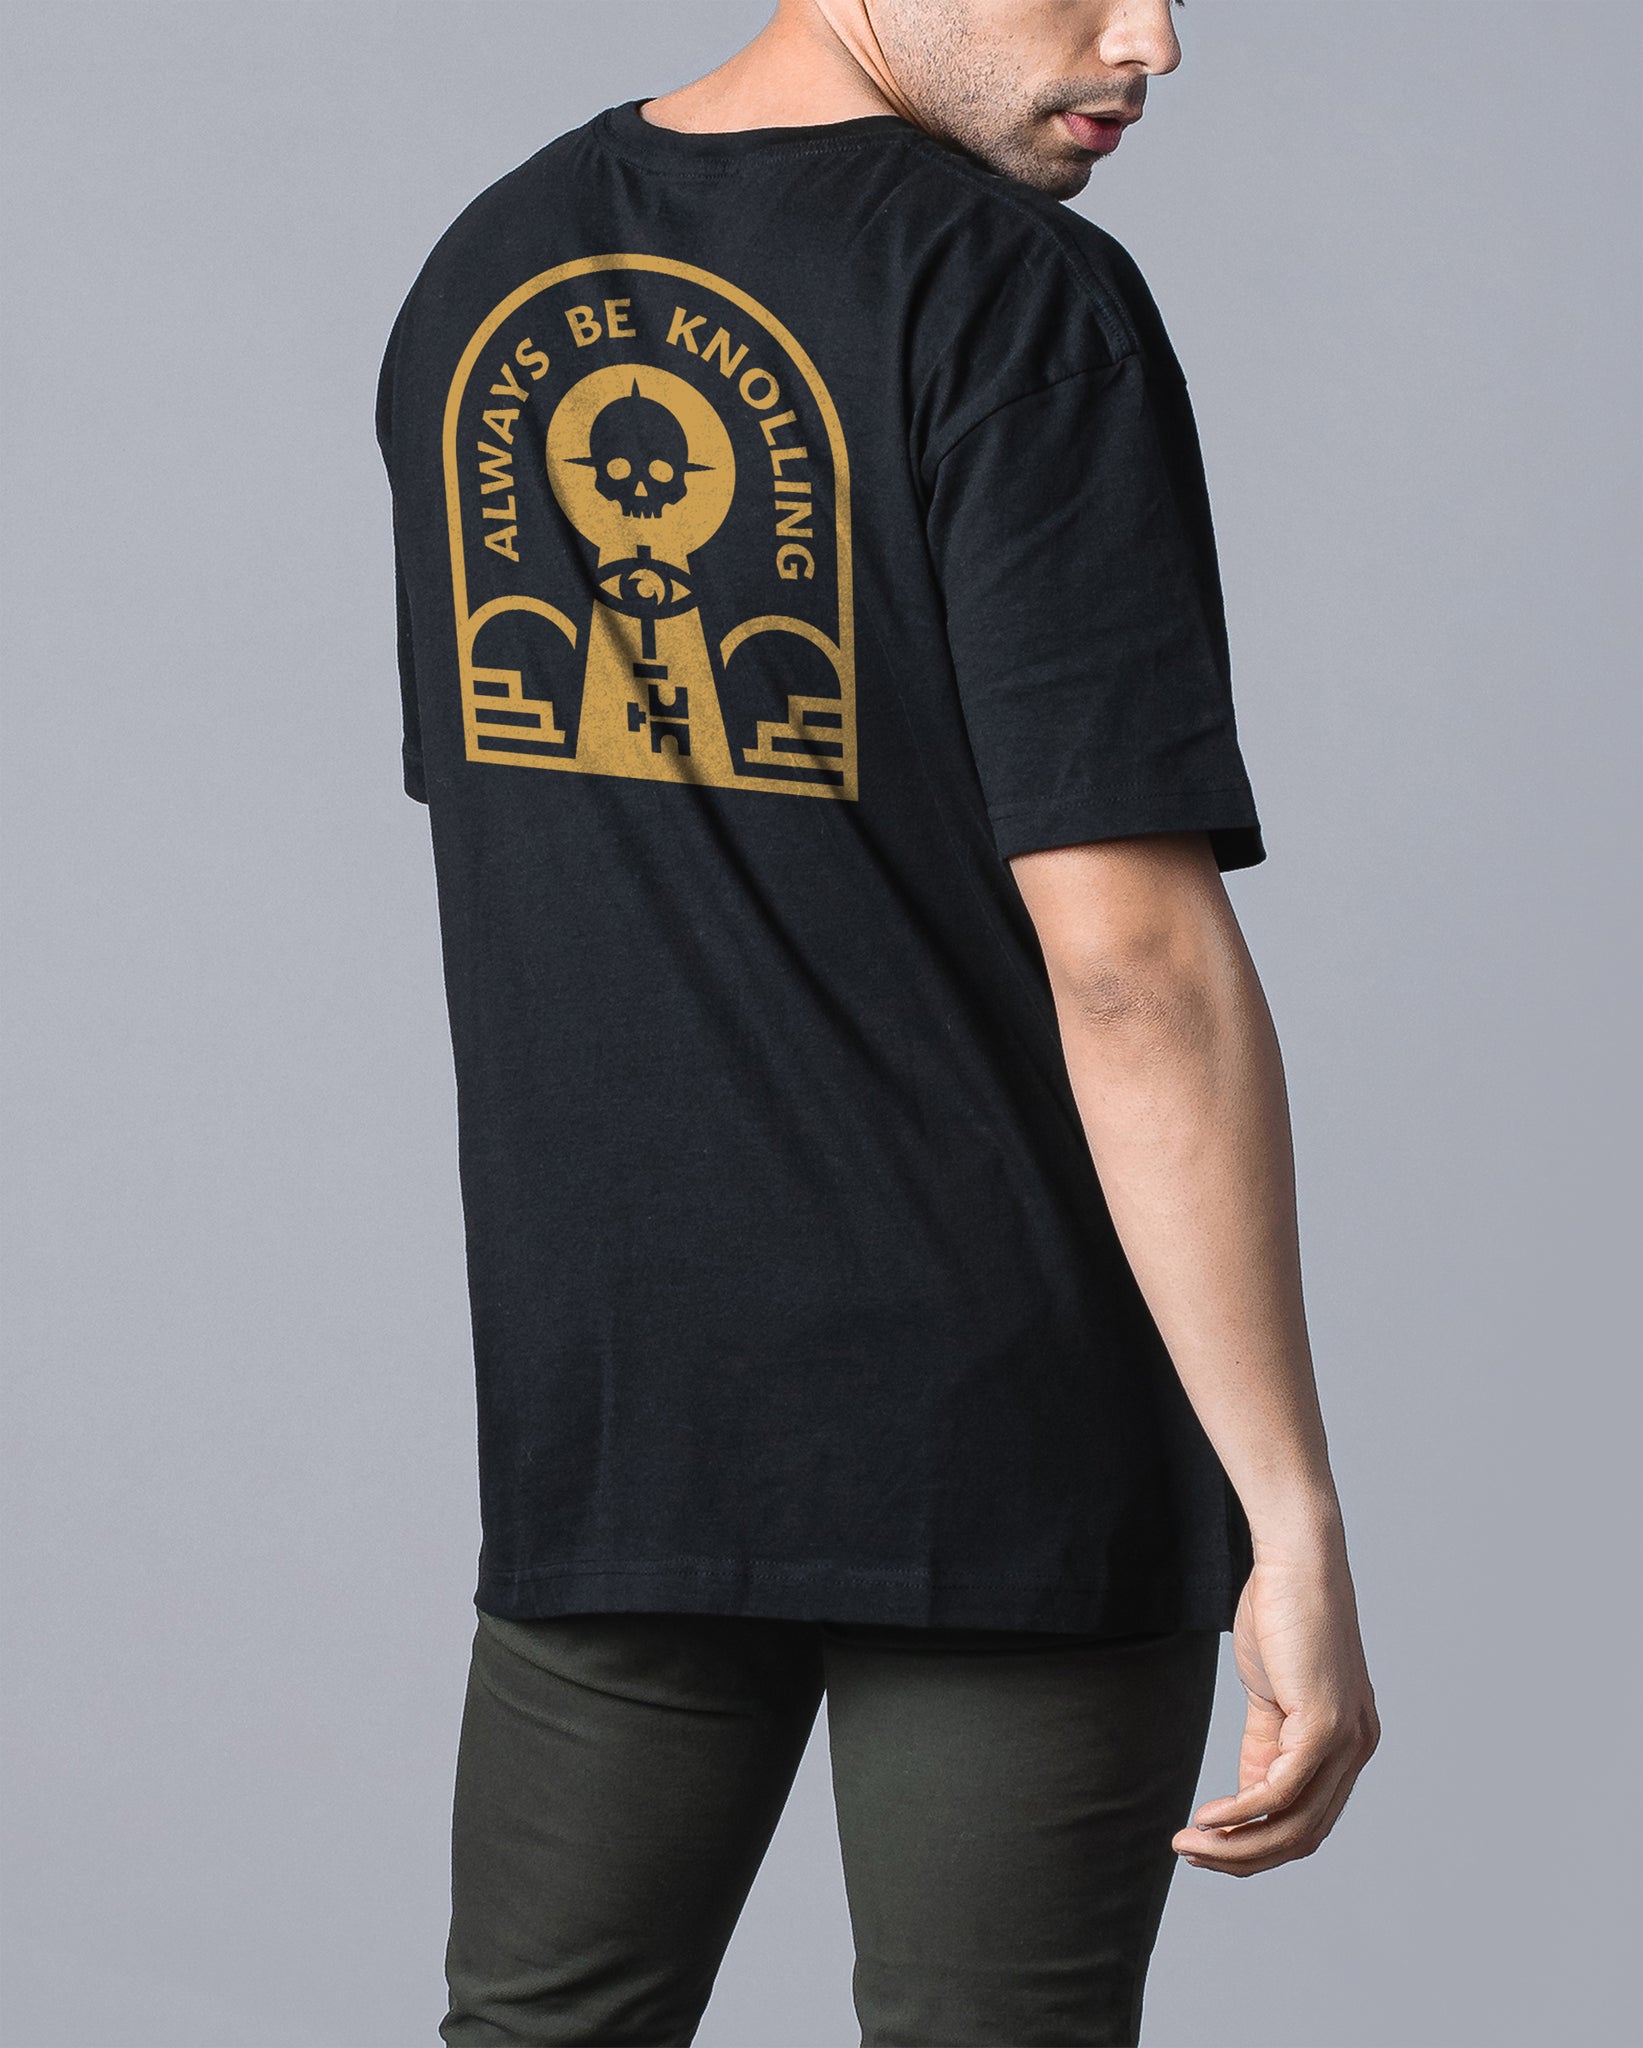 MOVER & SHAKER X DEATH & CO ABK T-Shirt – Mover & Shaker Co